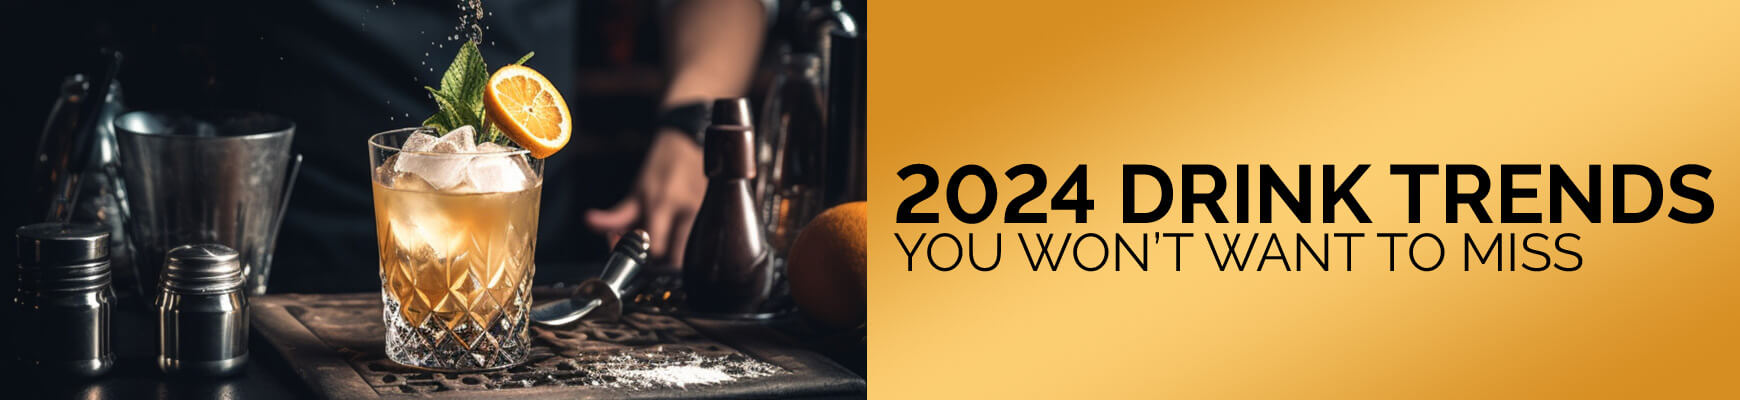 2024 Drink Trendds You Won't Want to Miss